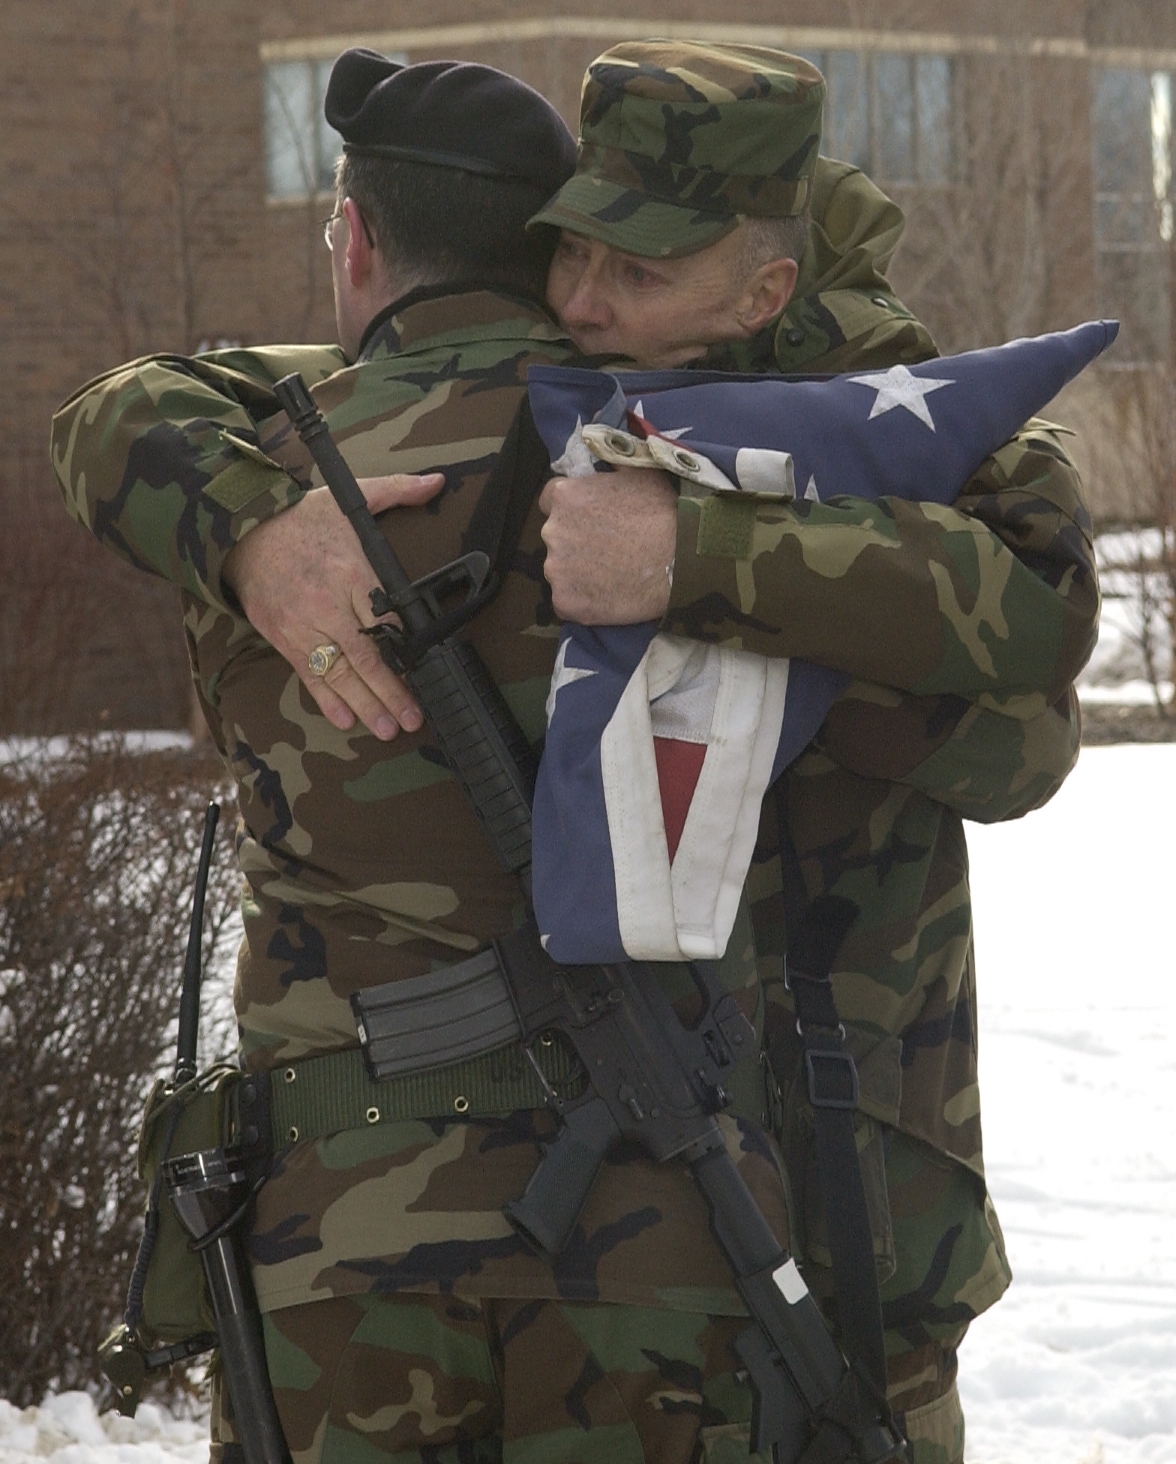 A military father hugging his sone